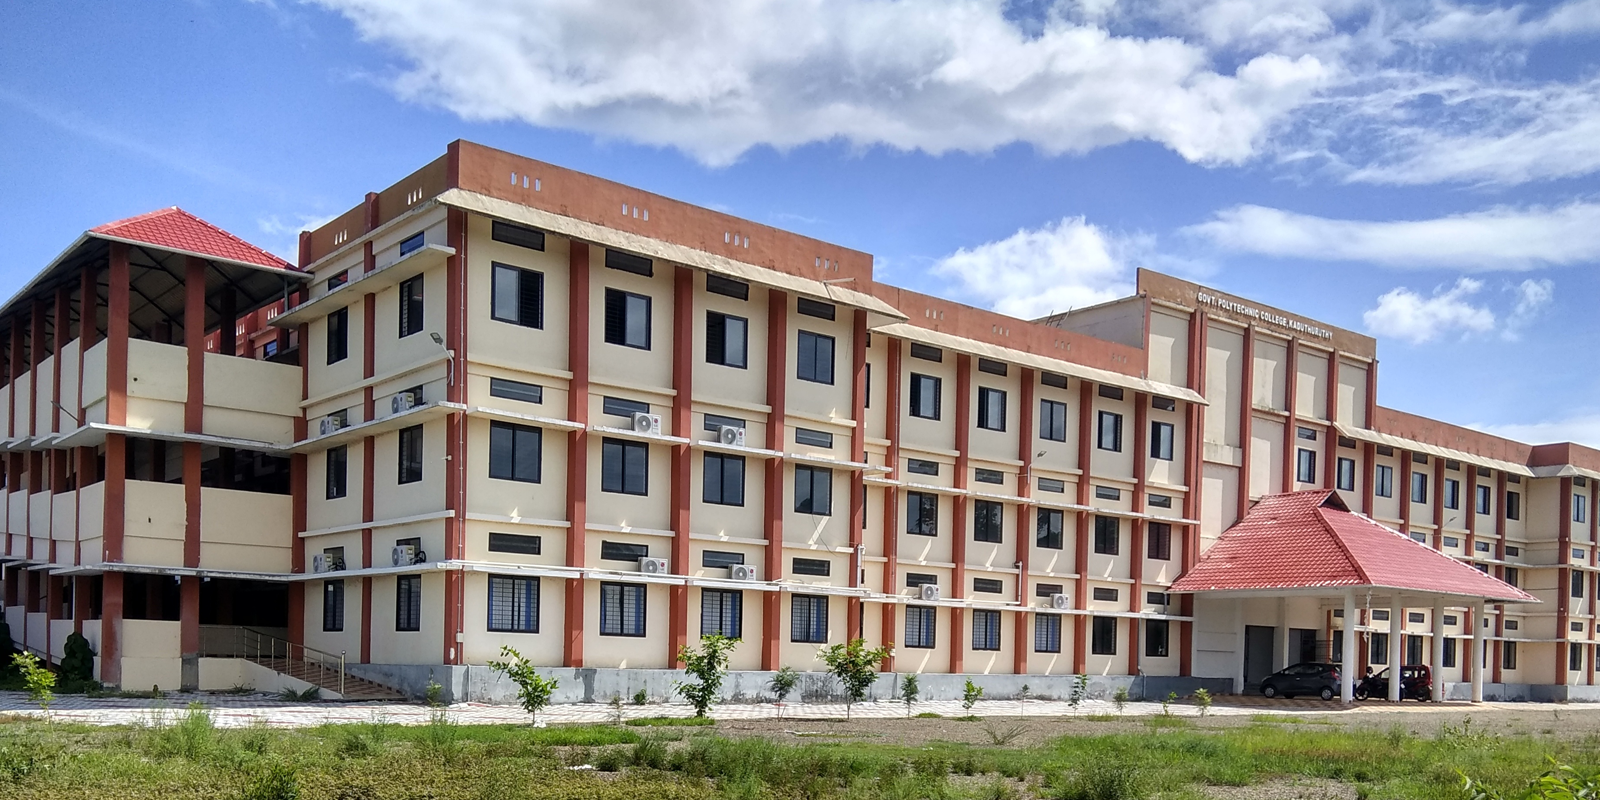 Top Government Polytechnic JEEP Colleges Name in Uttarakhand